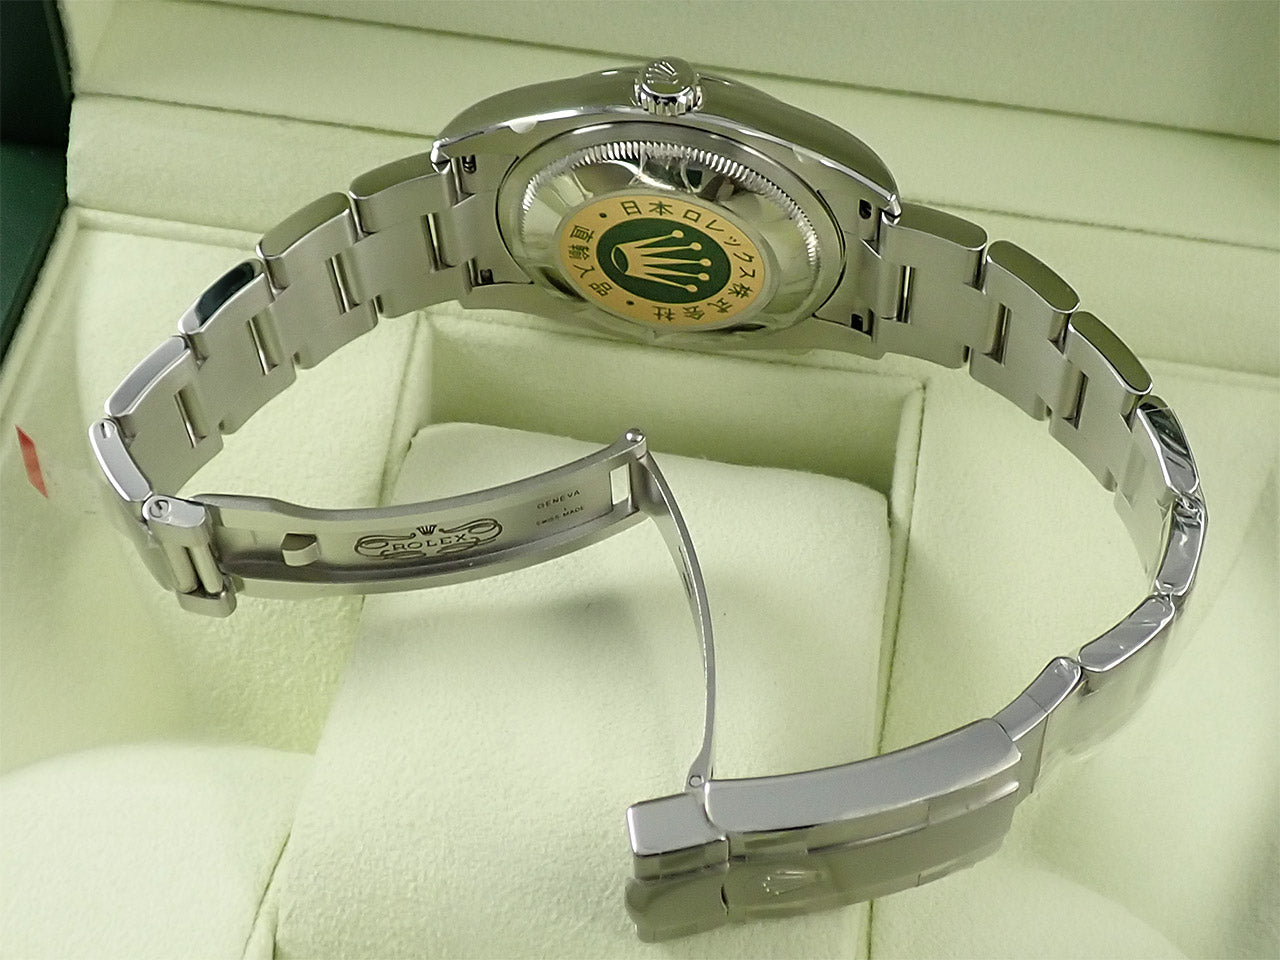 Rolex Oyster Perpetual Japan Limited Edition &lt;Warranty, Box, etc.&gt;